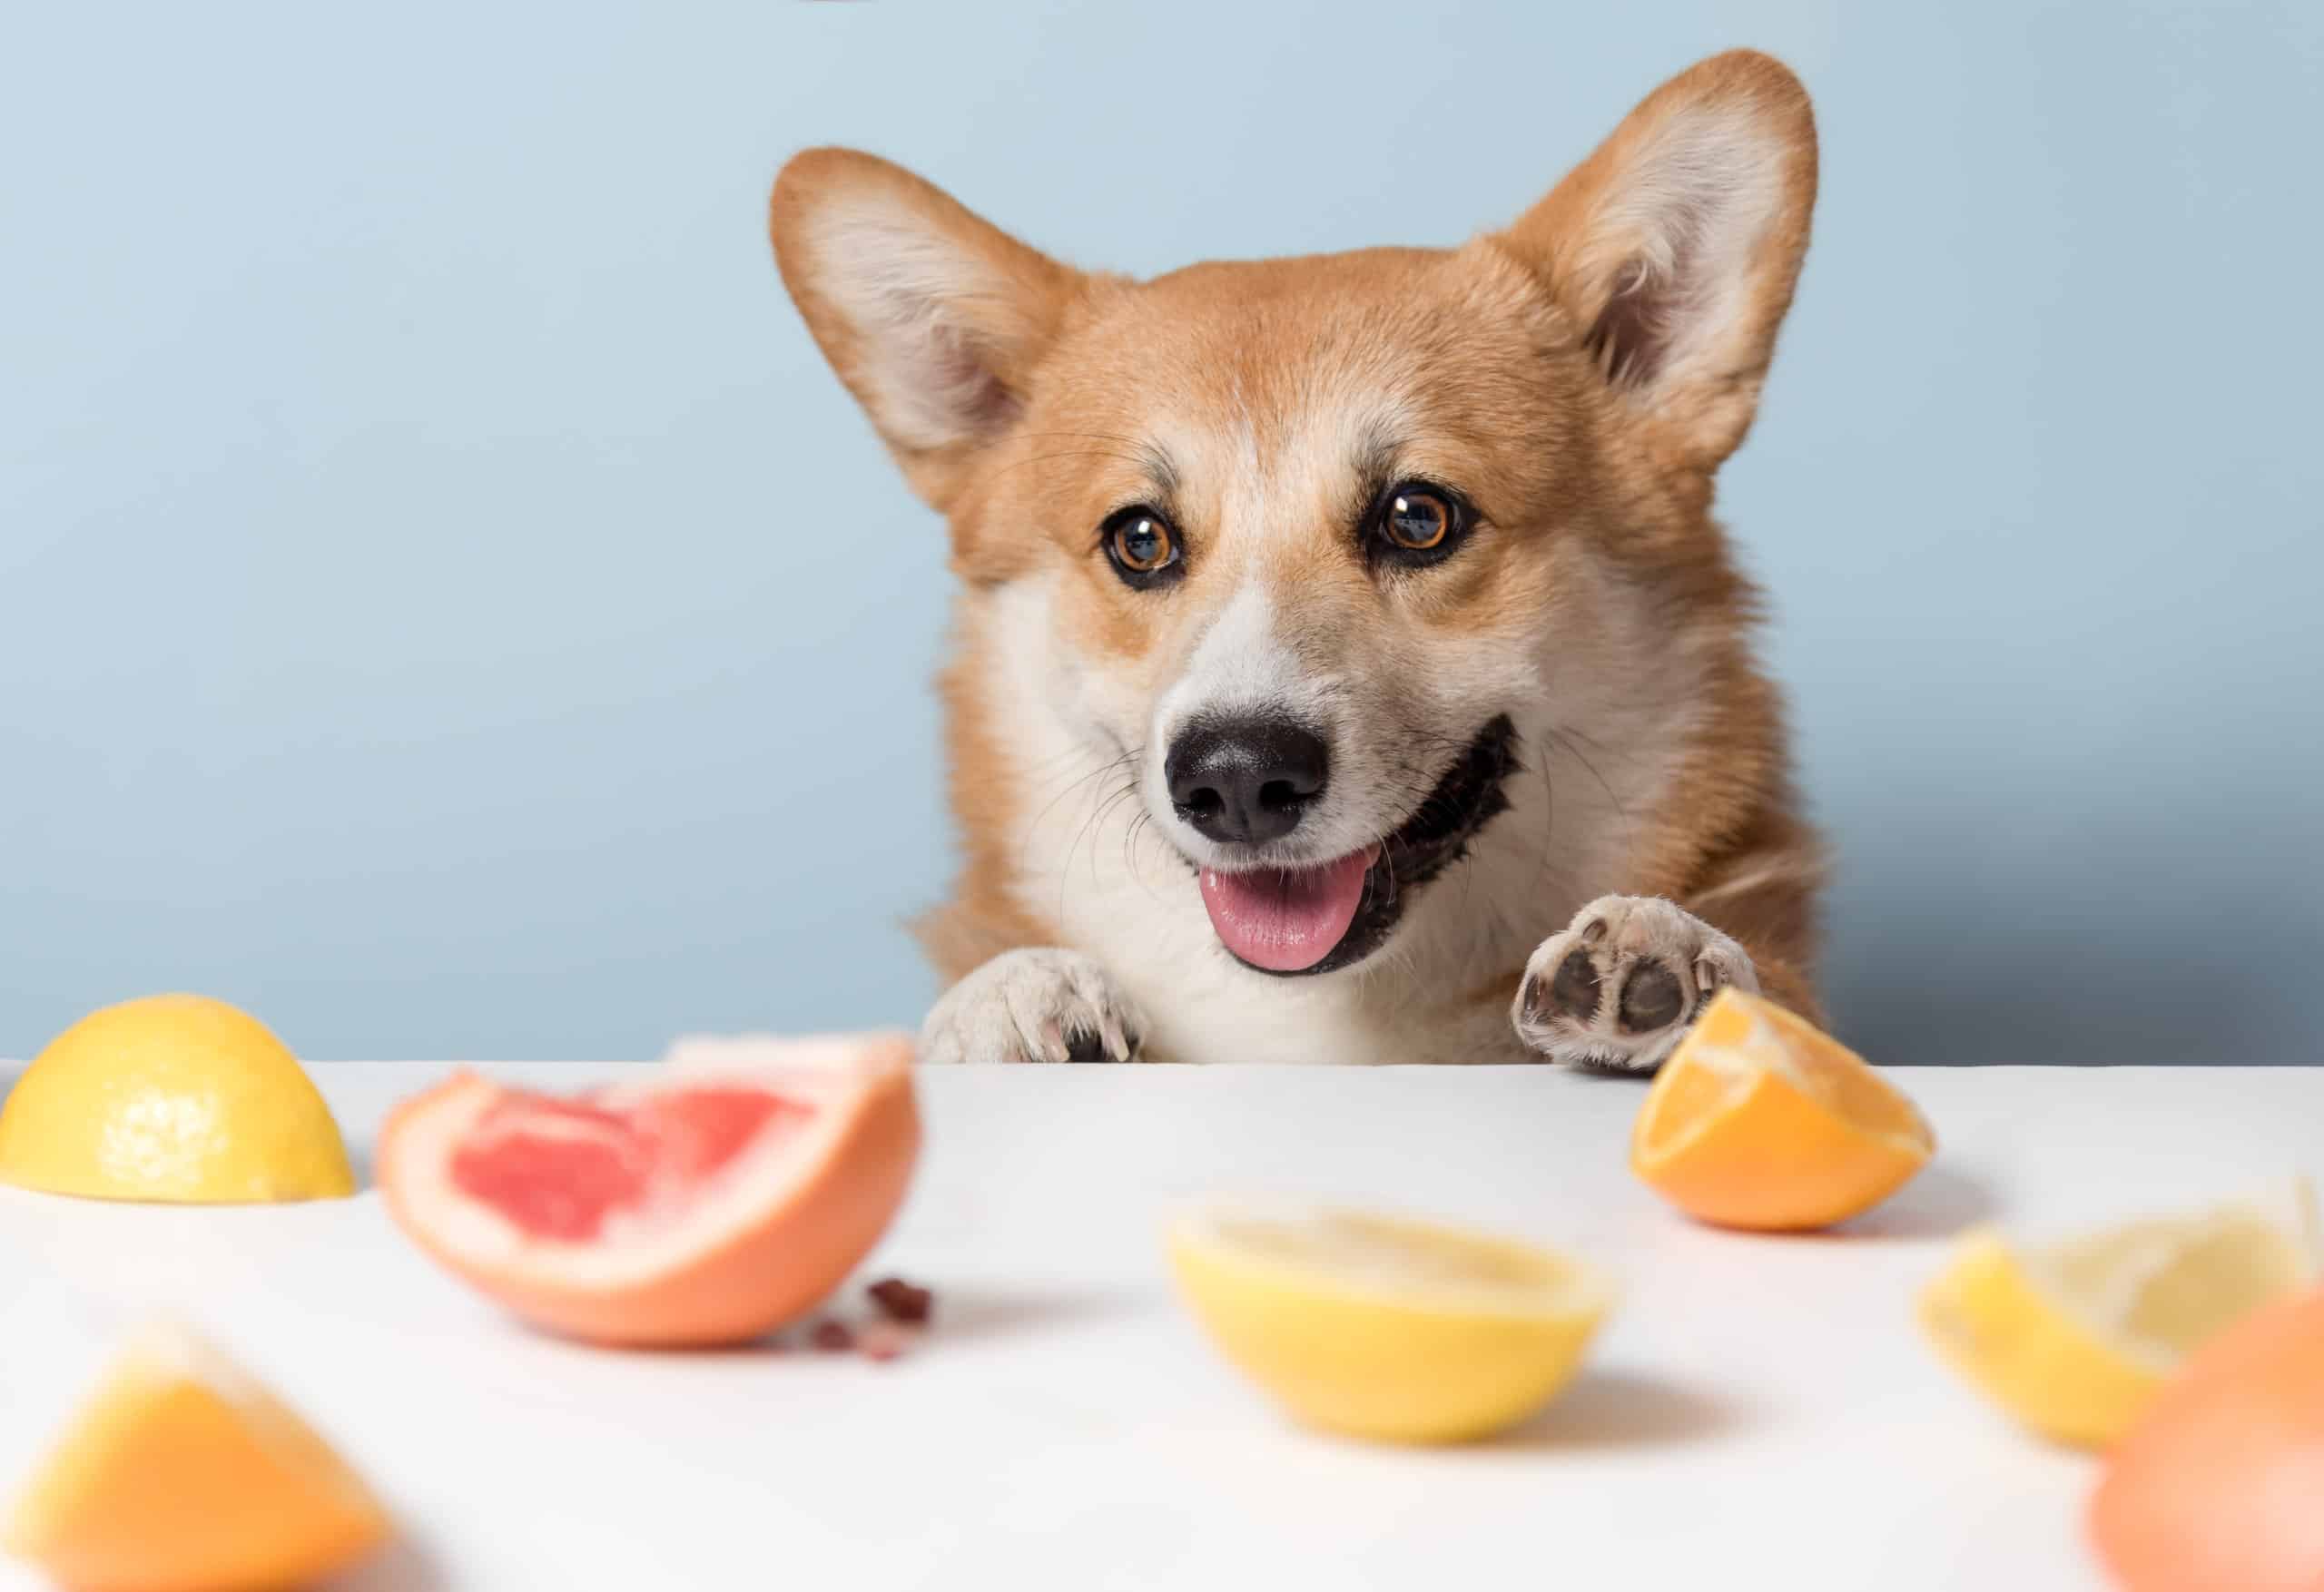 can dogs eat orange pith